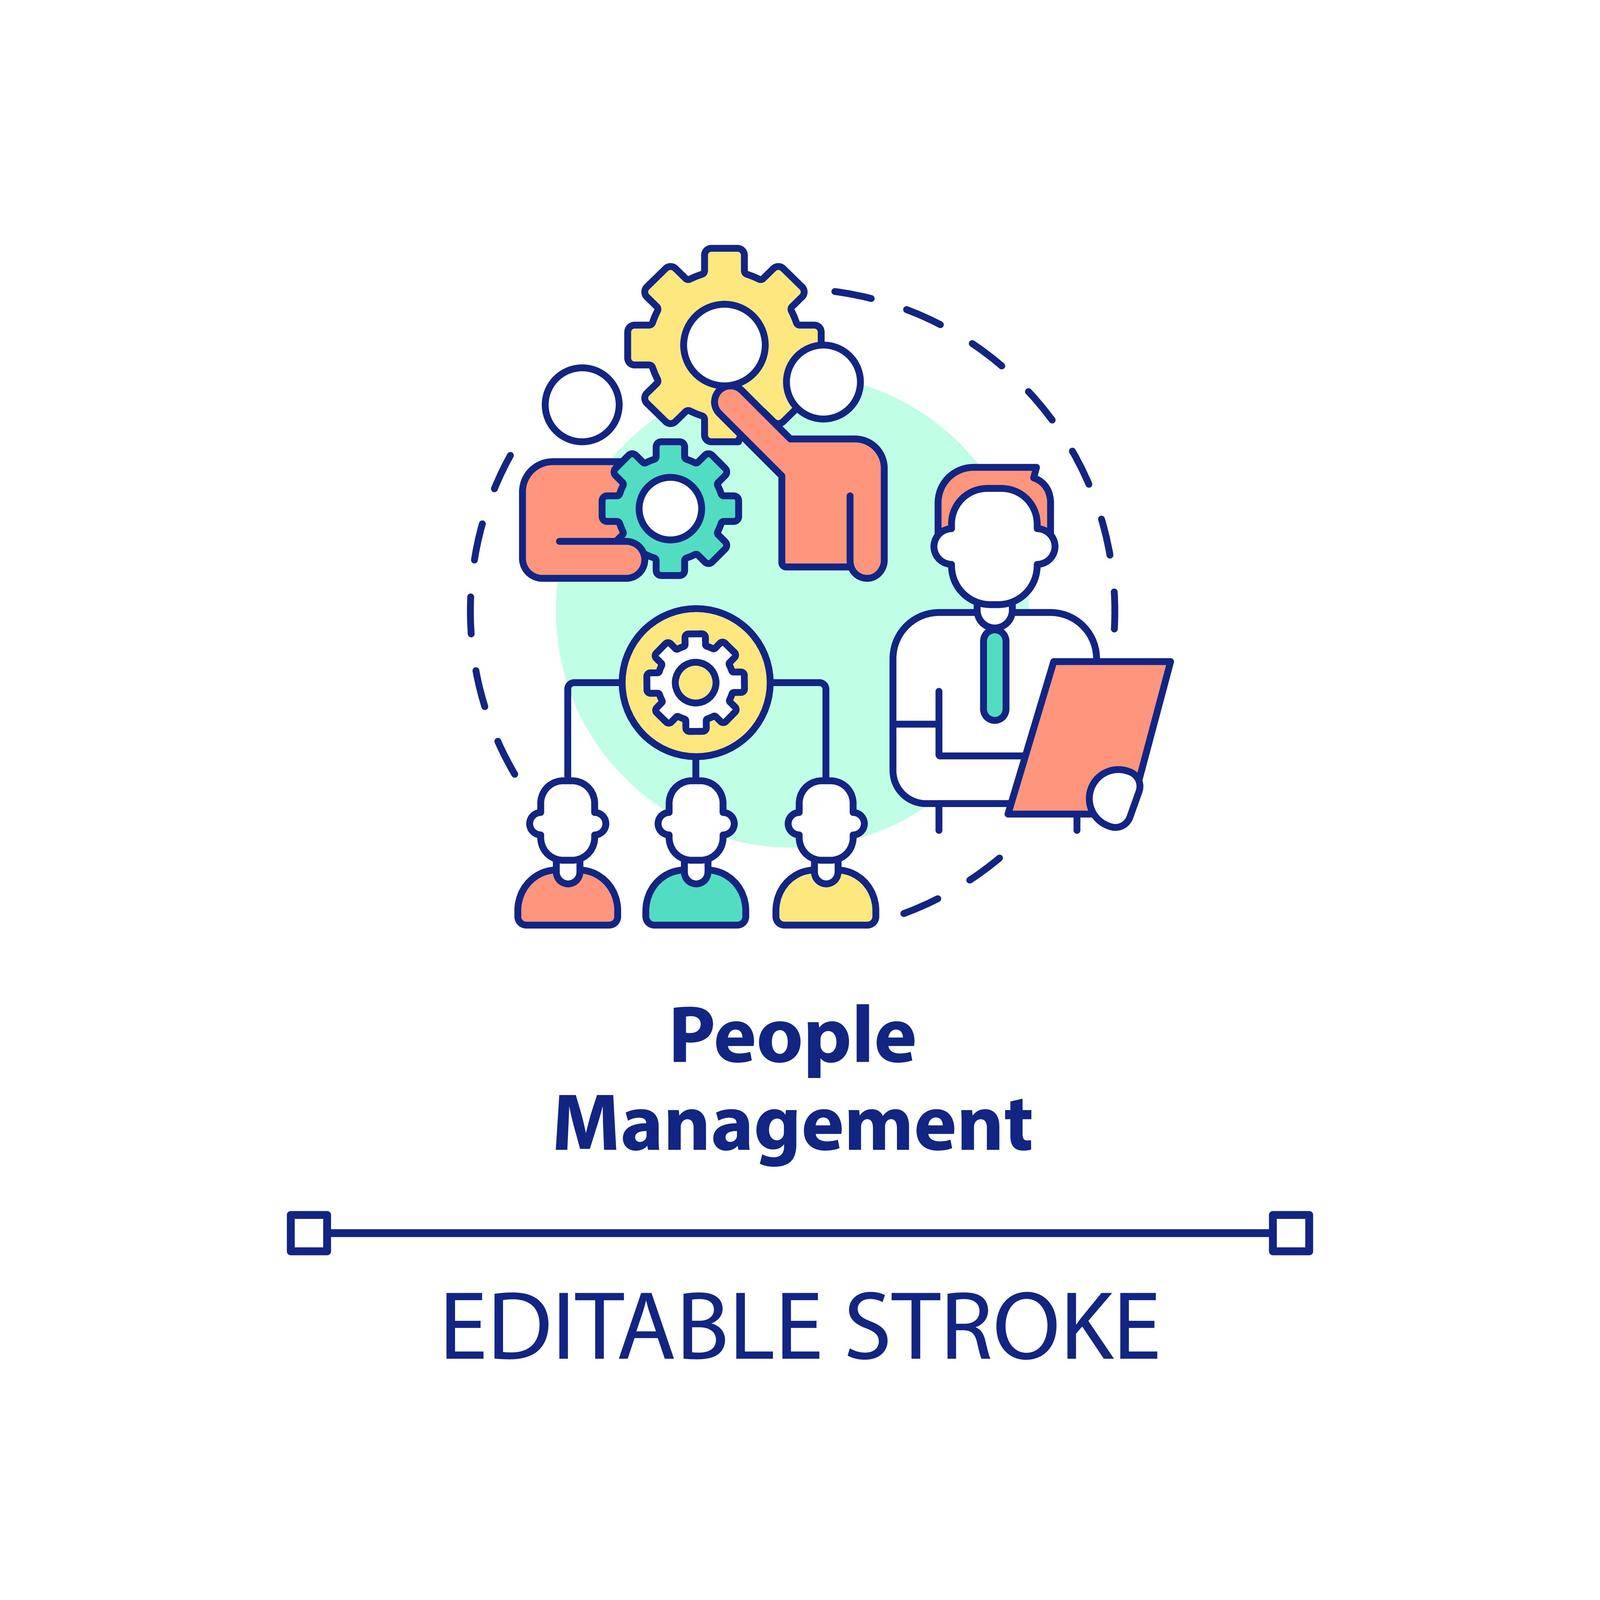 People management concept icon by bsd